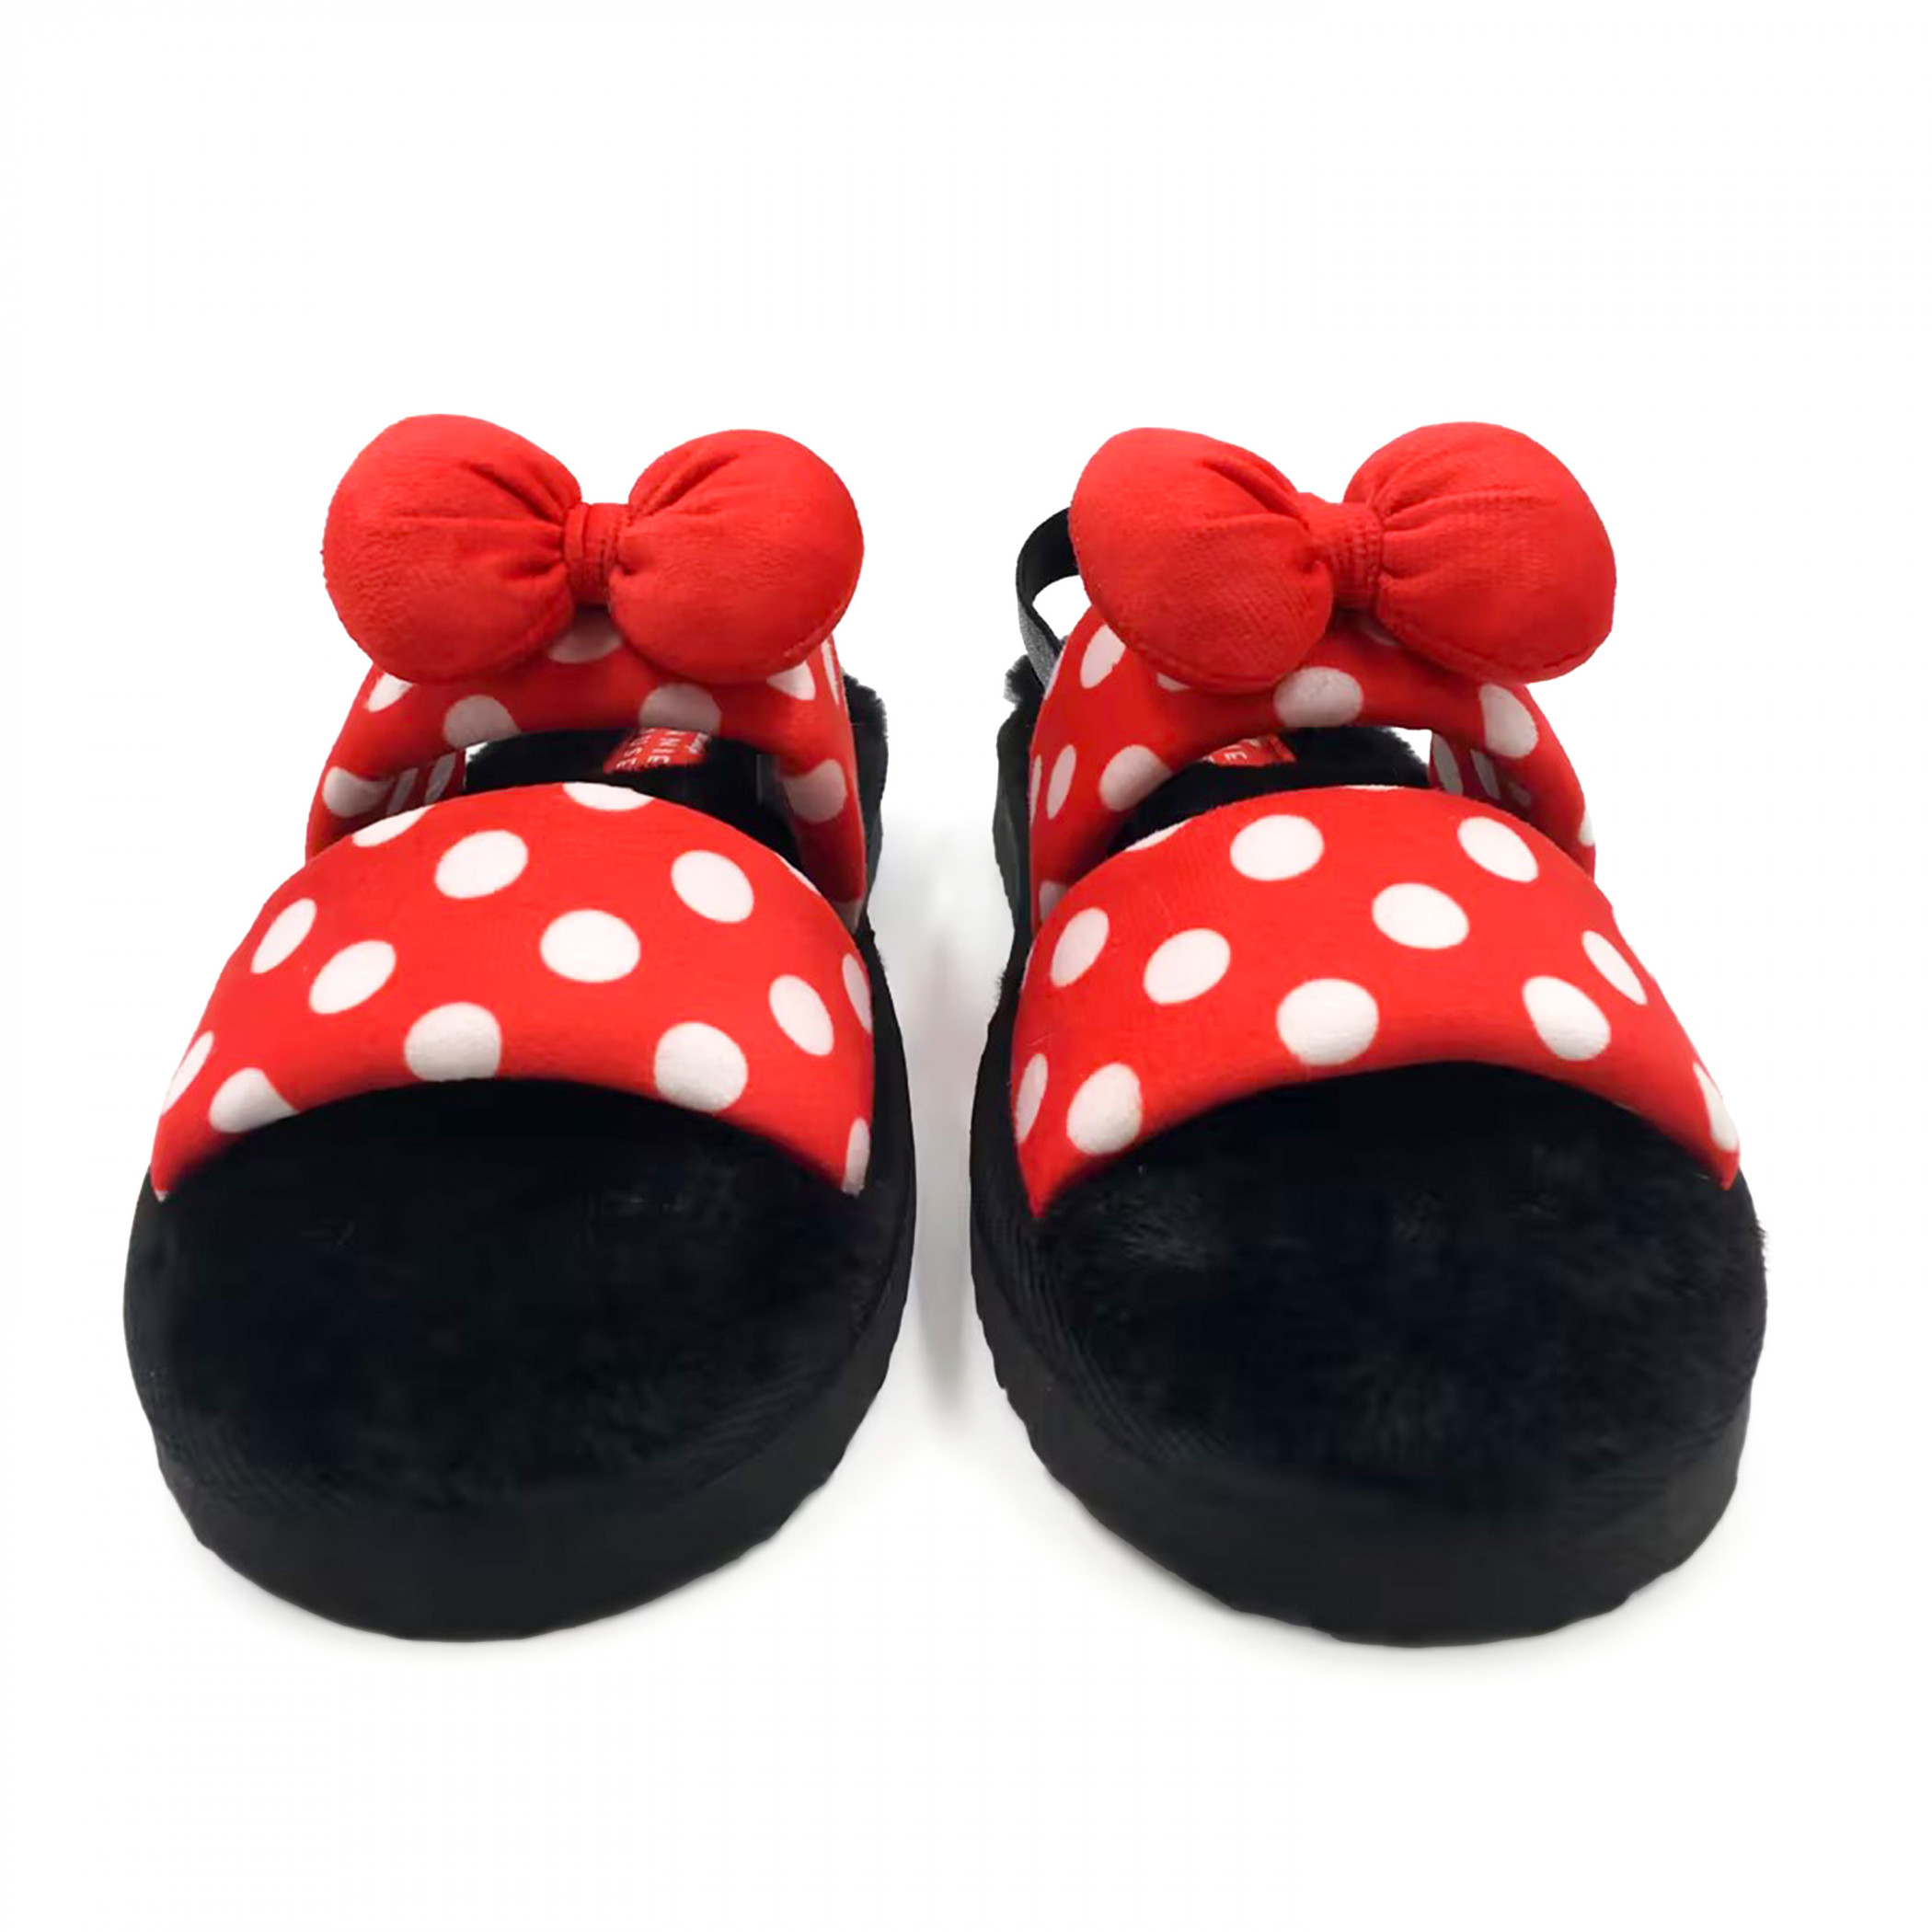 Minnie Mouse Polka Dots and Bows Women's Fuzzy Slippers